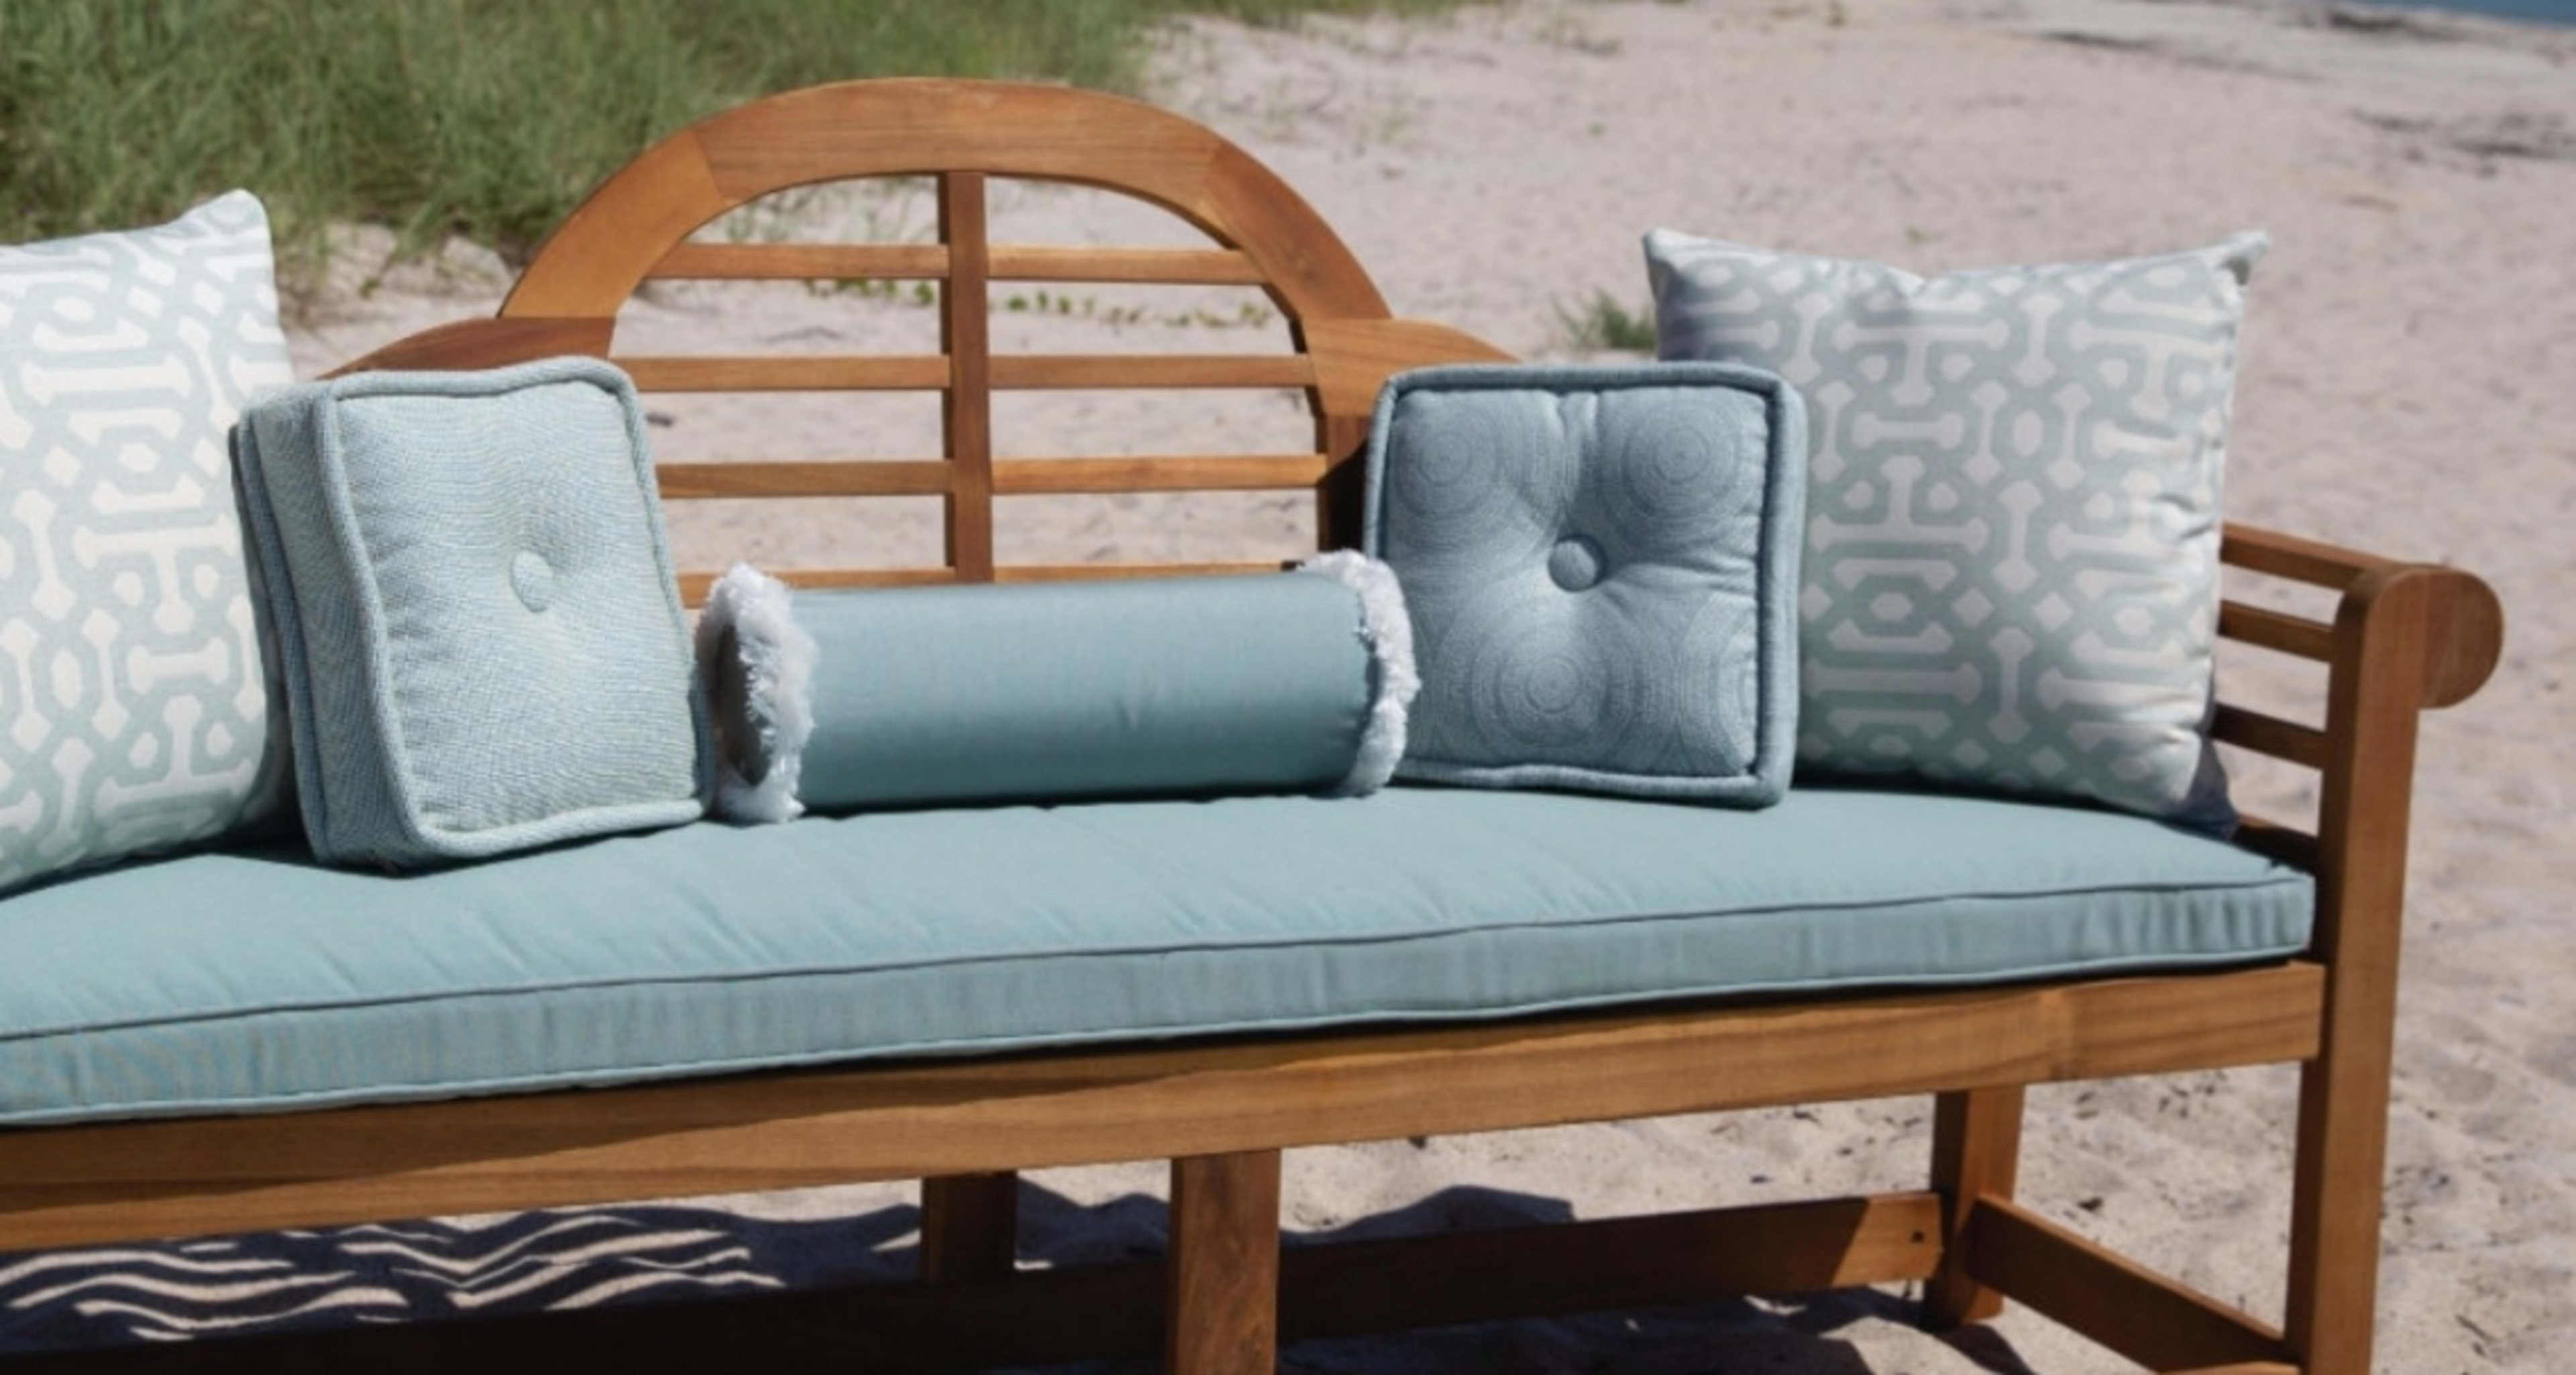 <p>A family-owned and operated business, Classic Cushions has produced premium-quality, stylish, and competitively-priced cushions since 1980. All products are handcrafted in the company’s state-of-the-art manufacturing facility in Vero Beach, Florida, and are closely inspected to ensure consistent quality.</p>